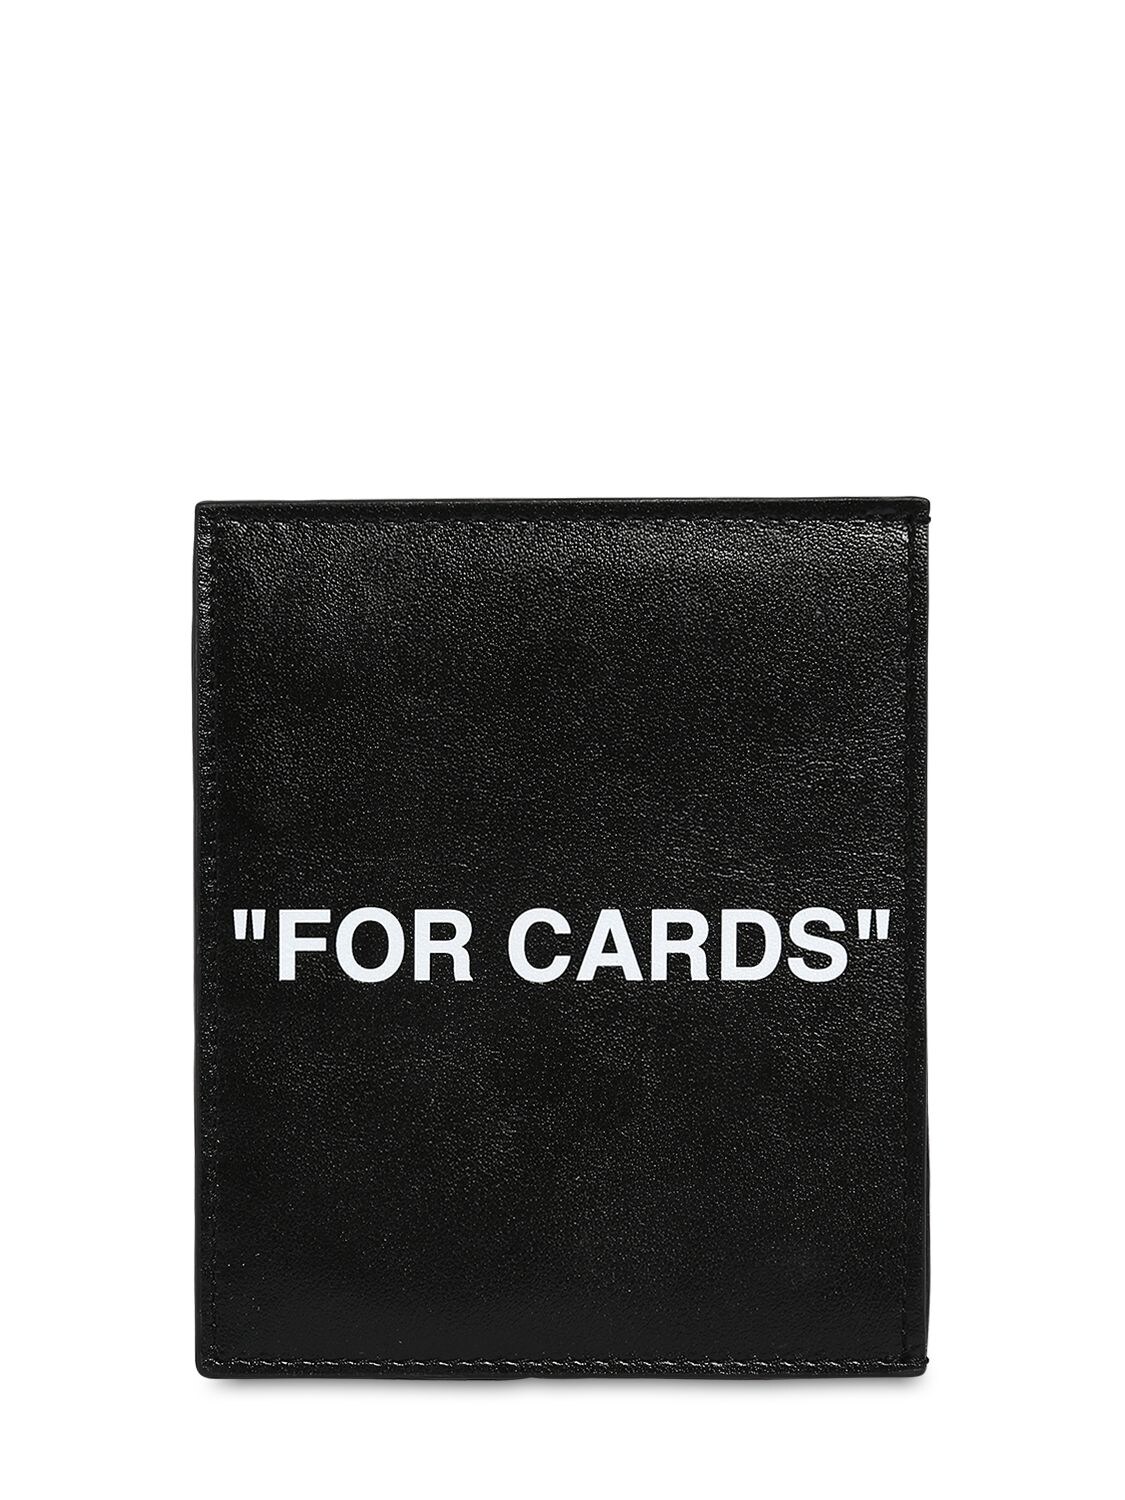 OFF-WHITE "FOR CARDS" LEATHER CARD HOLDER,71IJSX037-MTAWMQ2